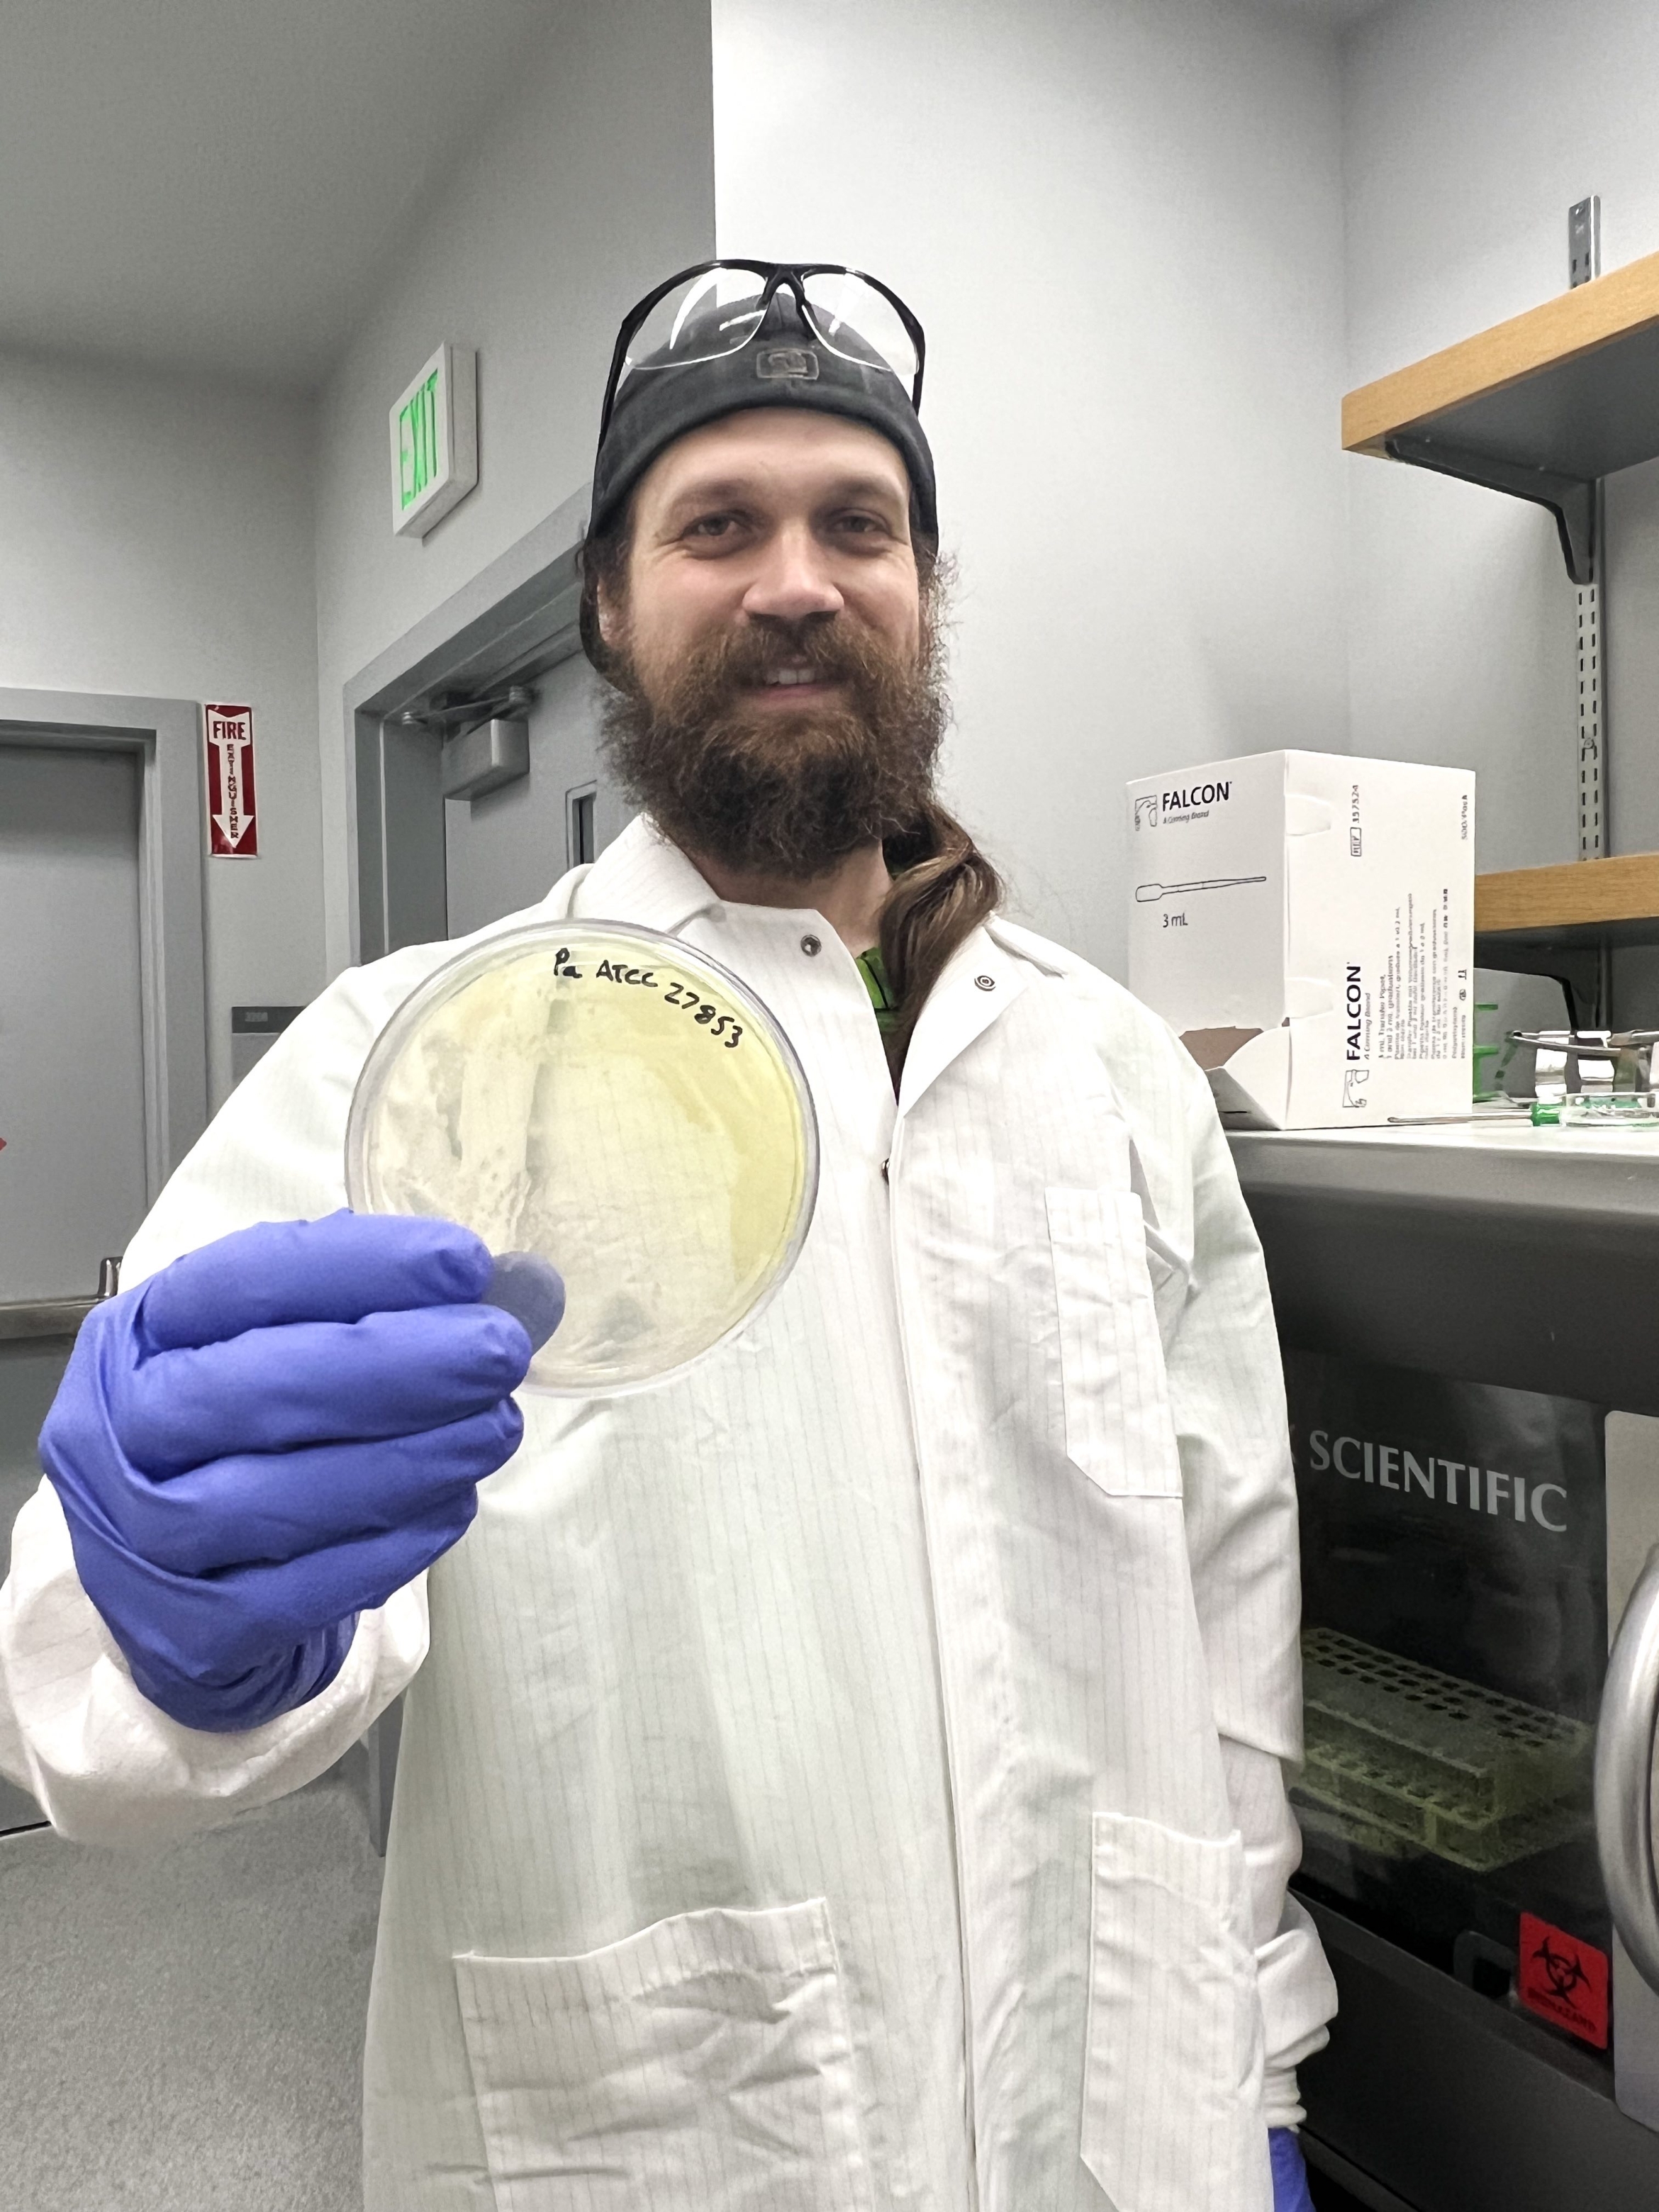 Man with big bushy beard, backwards ballcap, safety glasses atop his head, wearing white lab coat and purple rubber gloves, holds up a cell culture plate, smiling for camera in a lab